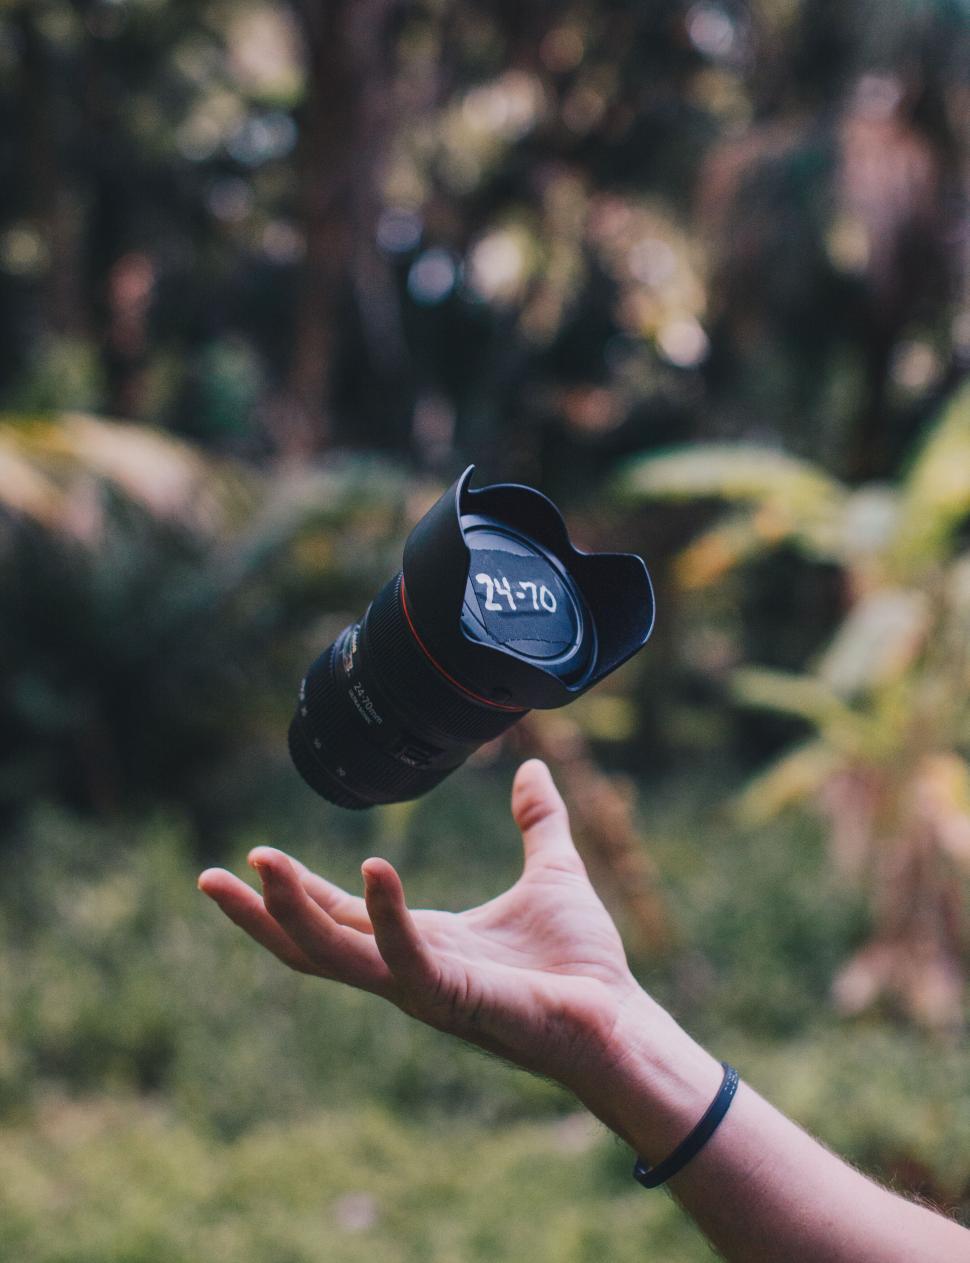 Free Image of Camera lens levitating above a hand 